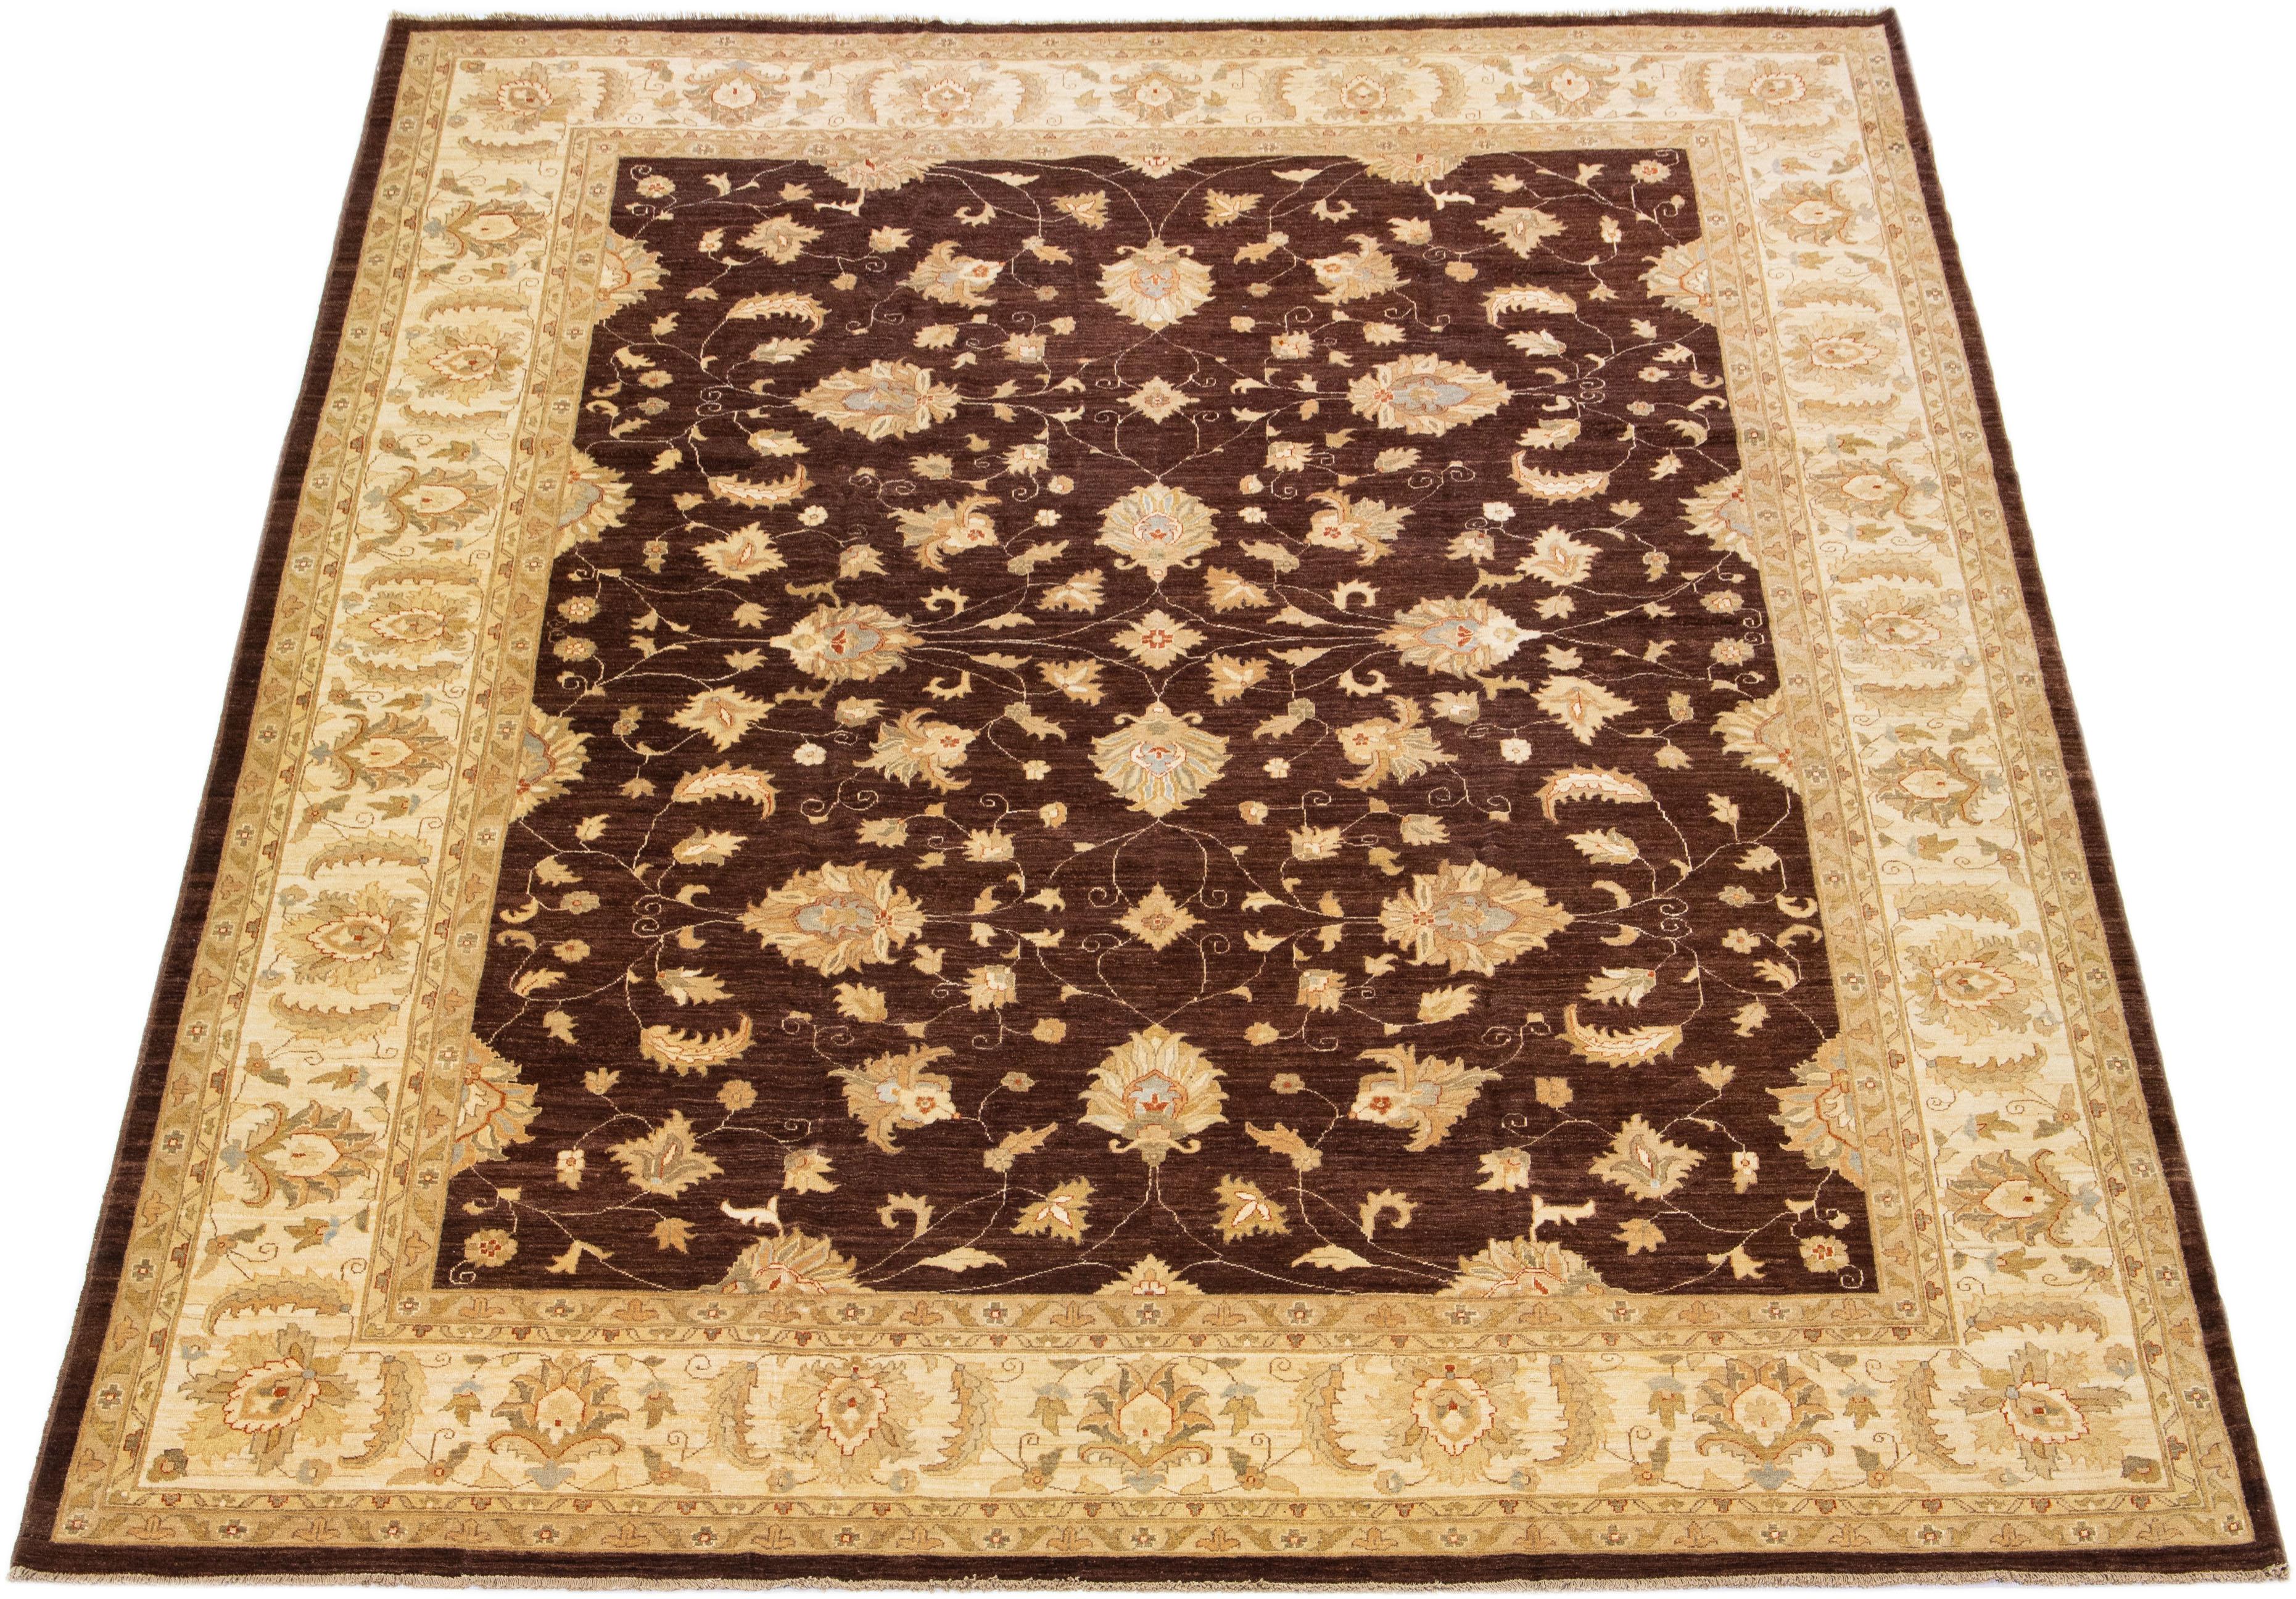 Beautiful Paki Peshawar hand-knotted wool rug with a brown color field. This modern rug has a beige and golden frame with green accents, a beautiful all-over Classic vine scroll, and a palmettes motif.

This rug measures: 12'4'' x 14'8